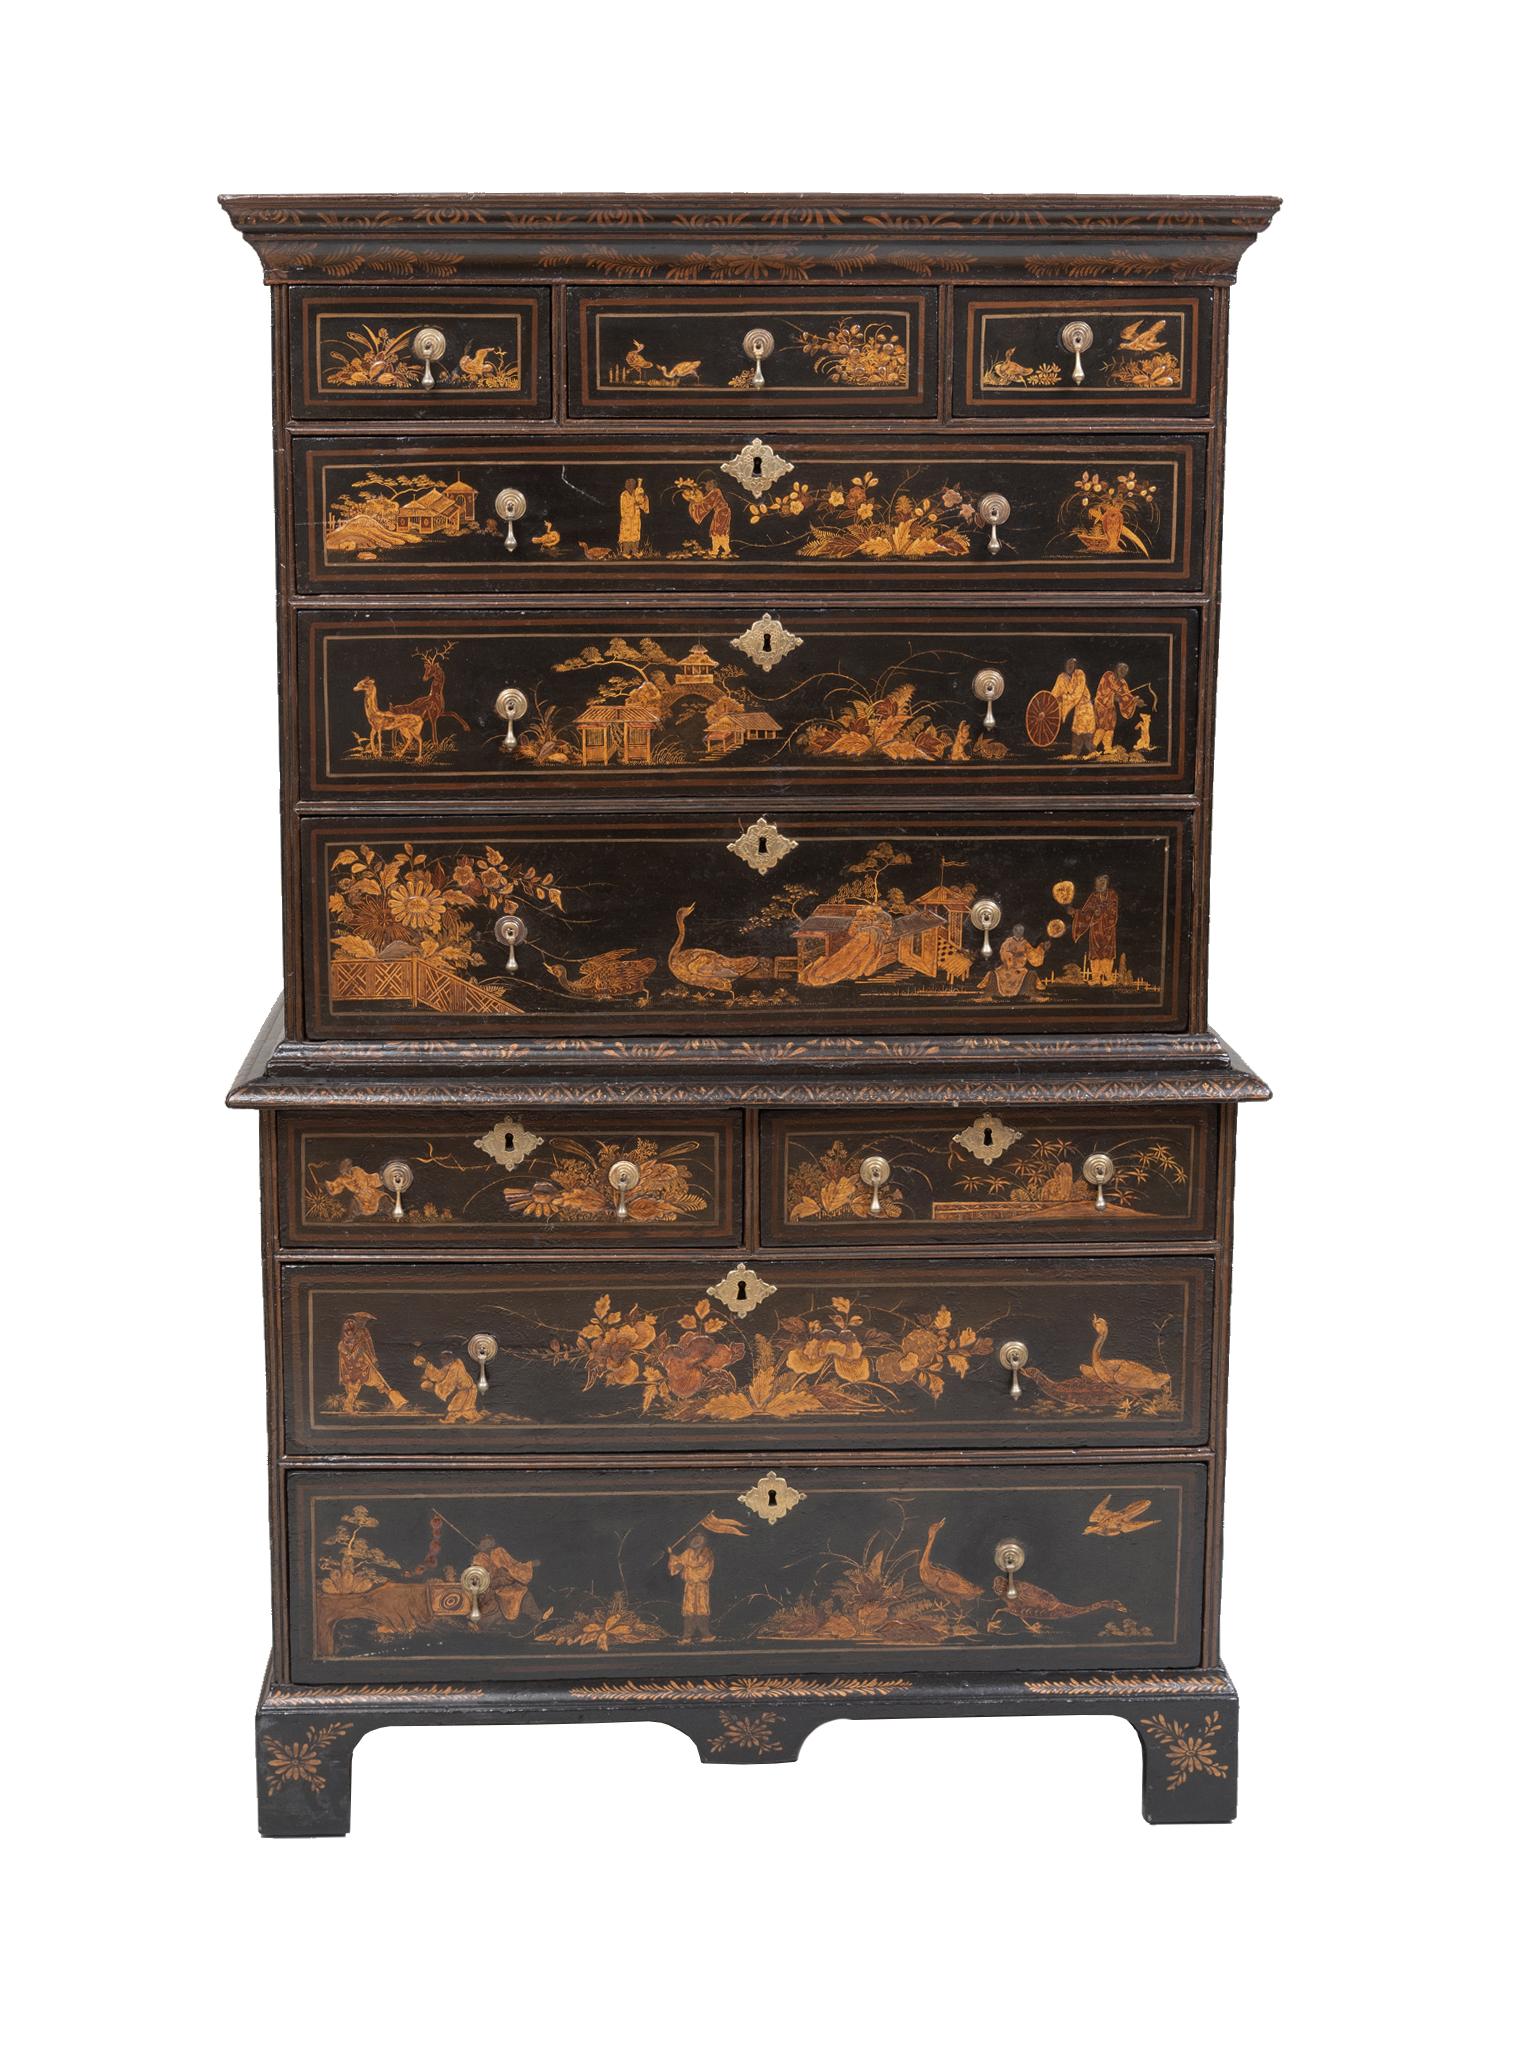 A truly special George I chest of drawers. Late 17th - Early 18th Century. It consists of two case pieces designed to fit one on top of the other. The fine craftsmanship and woodwork bring together a total of 10 drawers, varying in length. A